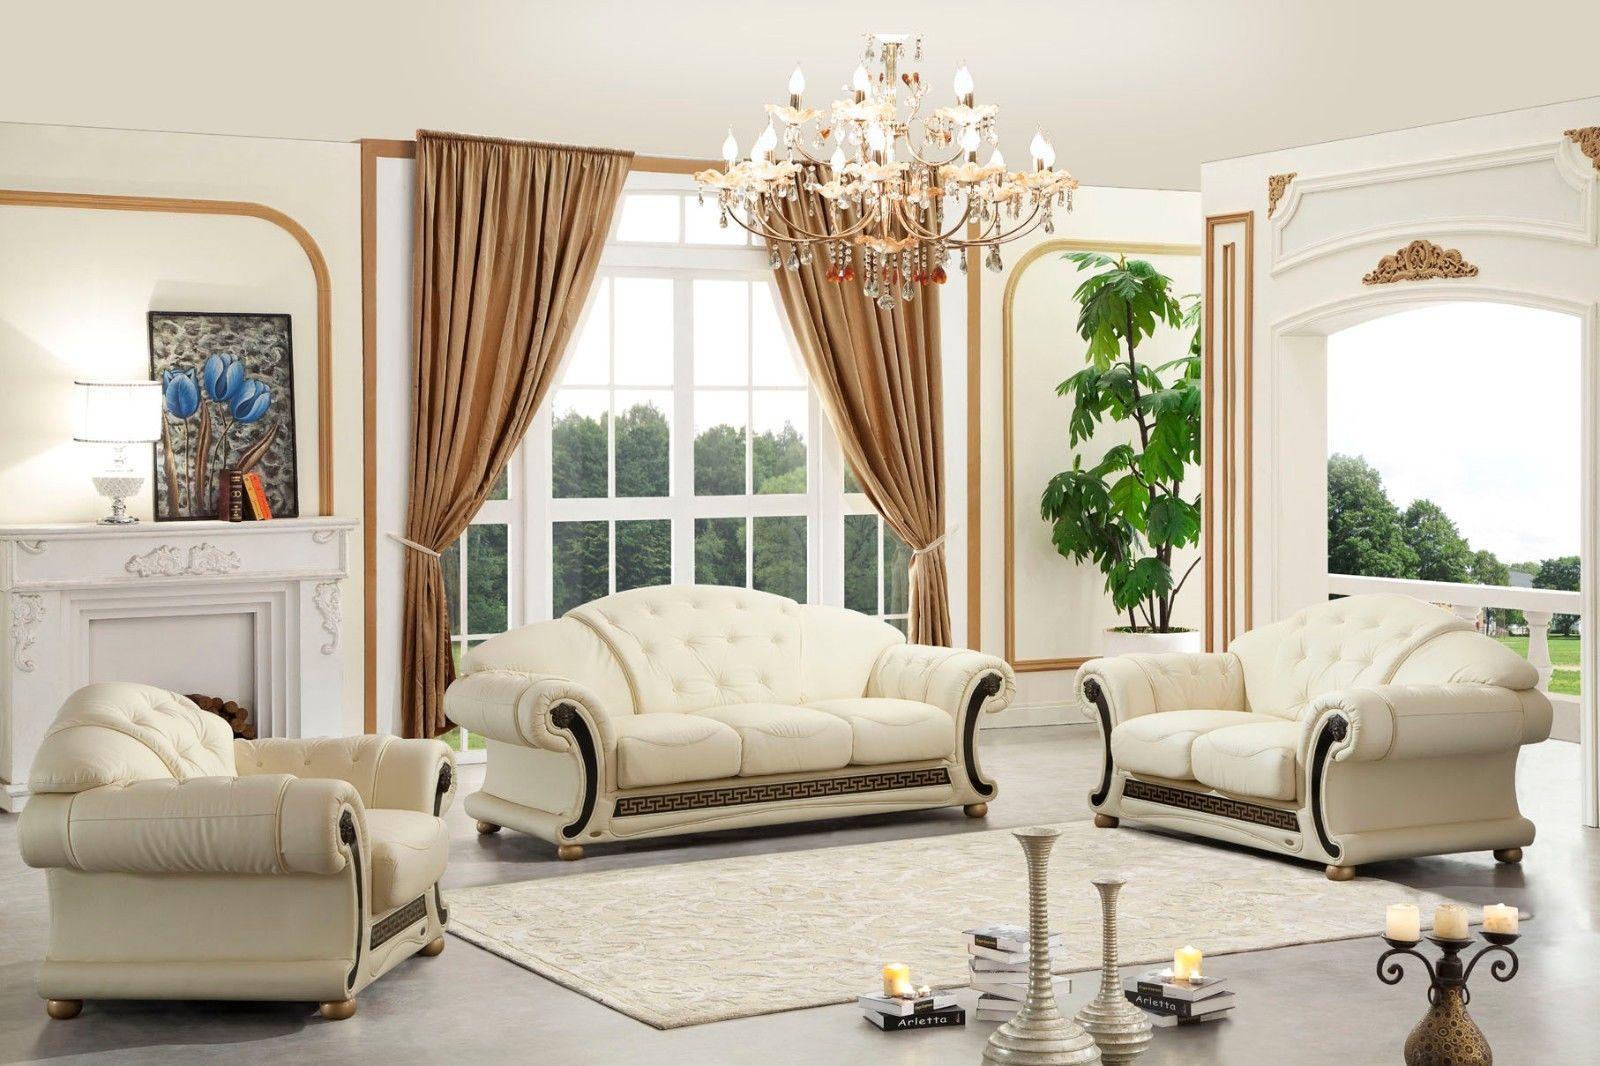 NY Furniture Leather Outlet Beige 3pcs buy Traditional V.Cleopatra online Chair on – Soflex Loveseat Sofa